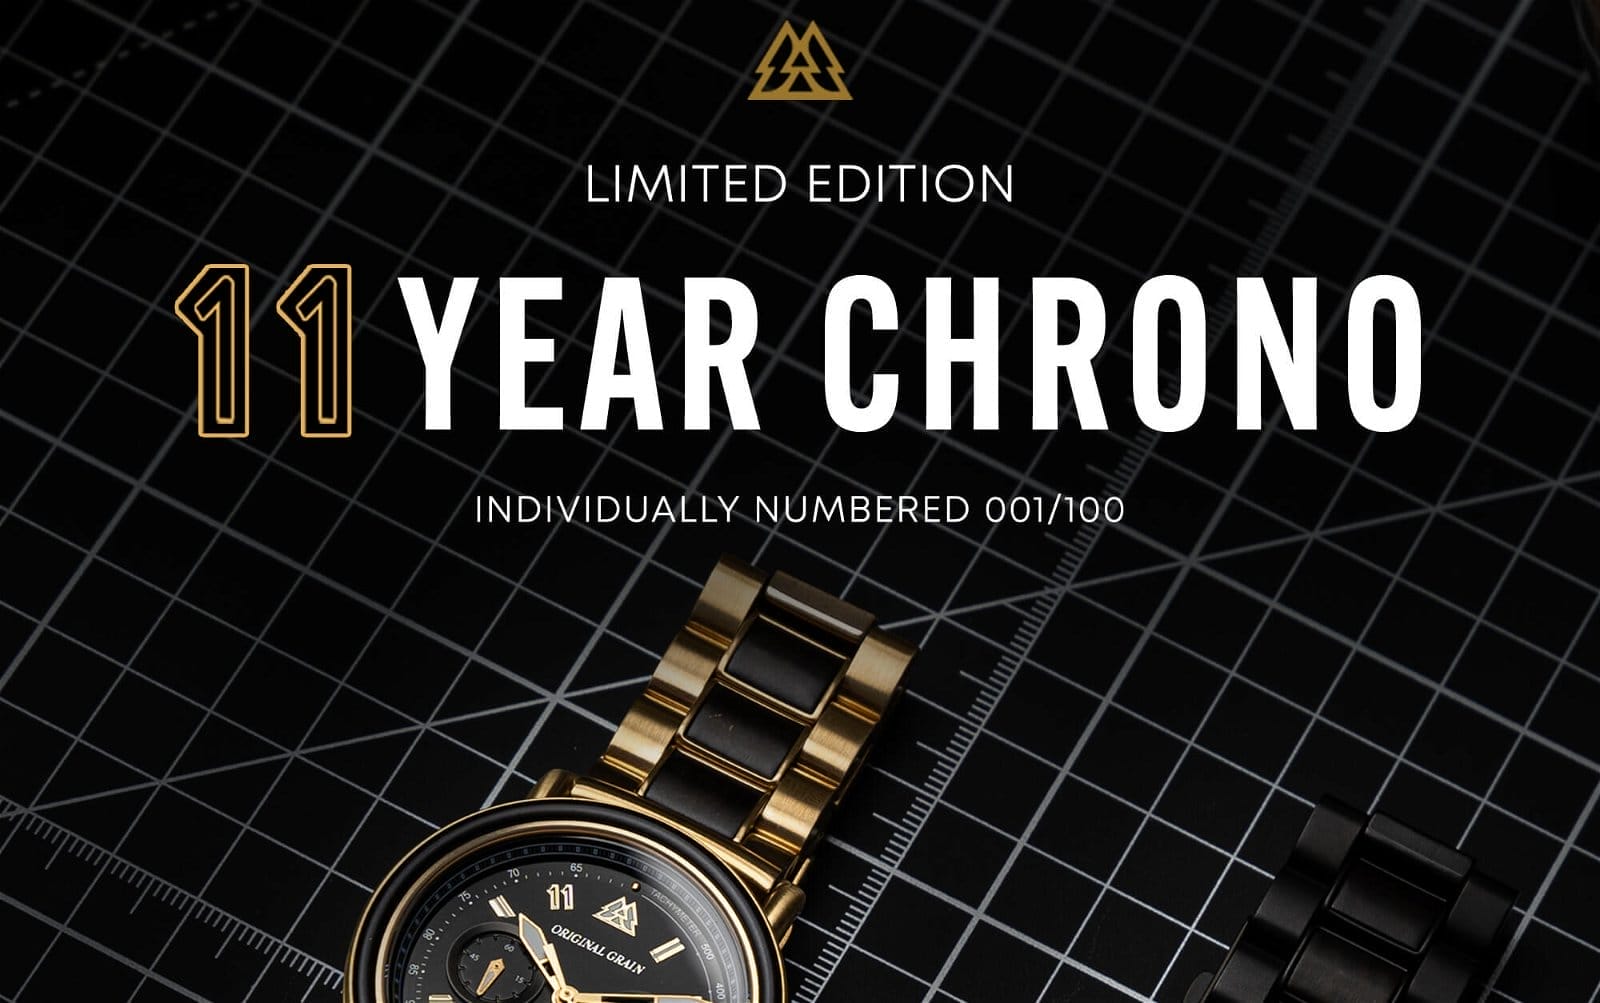 Original Grain's 11 Year Anniversary Chronographs are now available